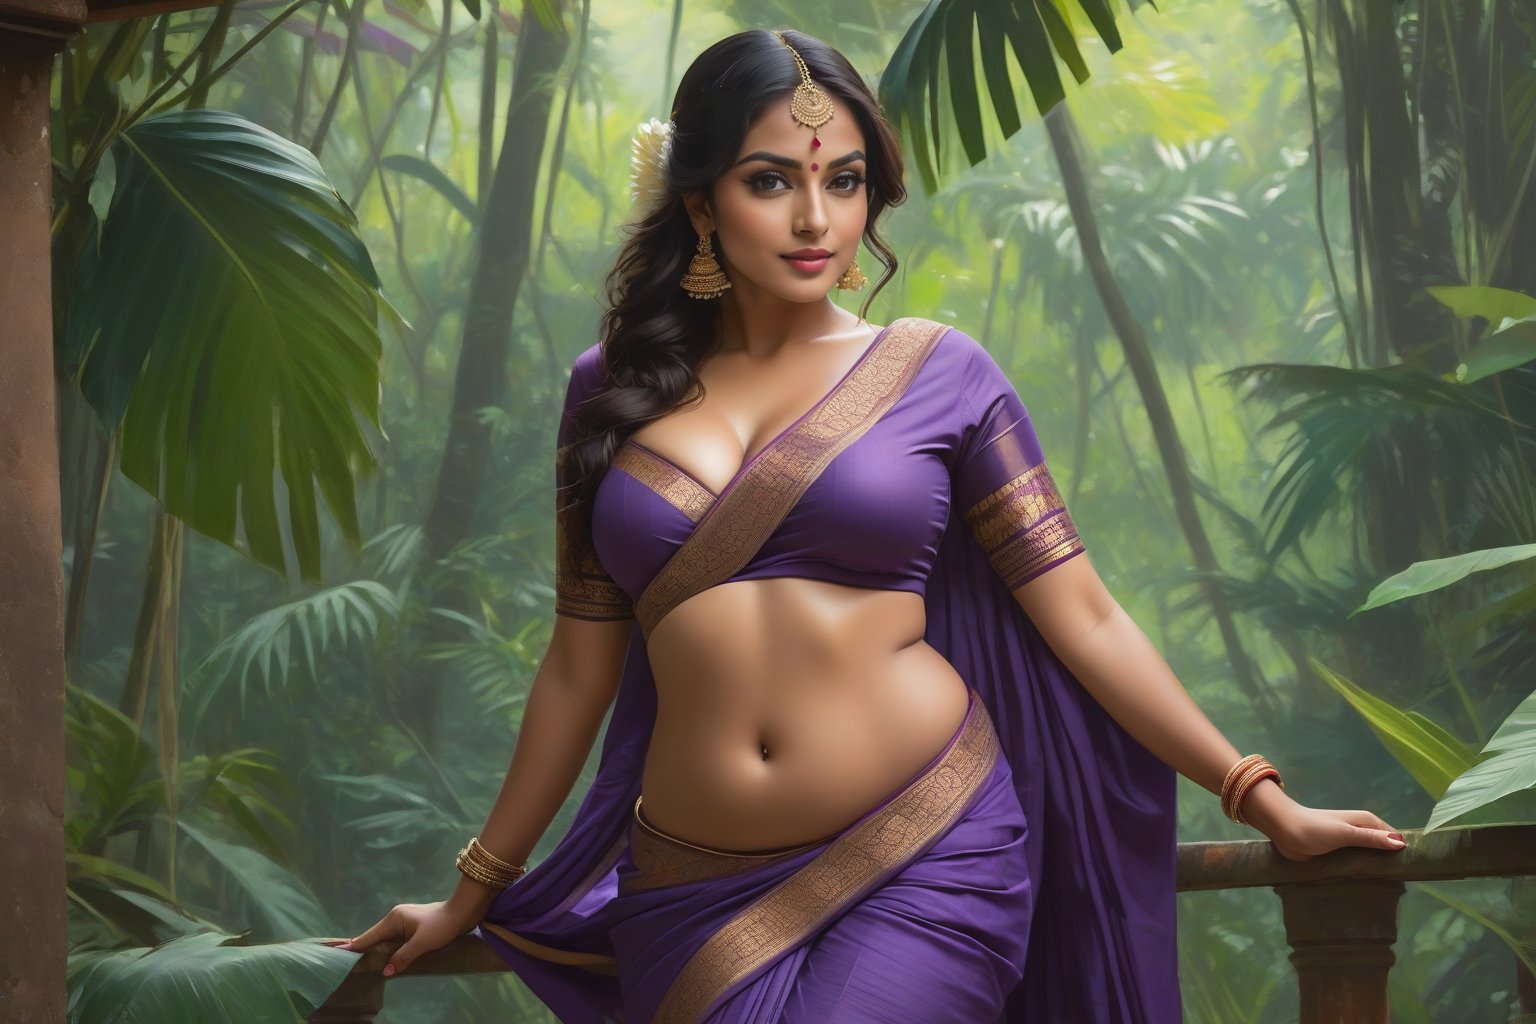 From below up, SFW, High res,(boobs grab), (sexy legs:1.3), 45 degree angle, modelshoot style,(mallu aunty), (masterpiece:1), (best quality:1), (extremely detailed CG unity 8k wallpaper), full shot body photo of the most beautiful artwork in the world, (beautiful Indian curvy lonely wife:1.2), (Cheeky smile:1), ((dancing sexually:0.5)), (from_side:1.3), black round-neck cotton blouse, ((Slips her purple cotton saree)) to show cleavage, sensual cleavage, ((Smooth skin:0.5)), beautiful (small waist, wide hips:0.5), sweaty body, in hut sorounded by jungle, (detailed face:1), professional majestic digital painting by Ed Blinkey, Atey Ghailan, Studio Ghibli, by Jeremy Mann, Greg Manchess, Antonio Moro, trending on ArtStation, trending on CGSociety, Intricate, (High Detail), ((Sharp focus)), dramatic, ((photorealistic digital painting)) art by midjourney and greg rutkowski